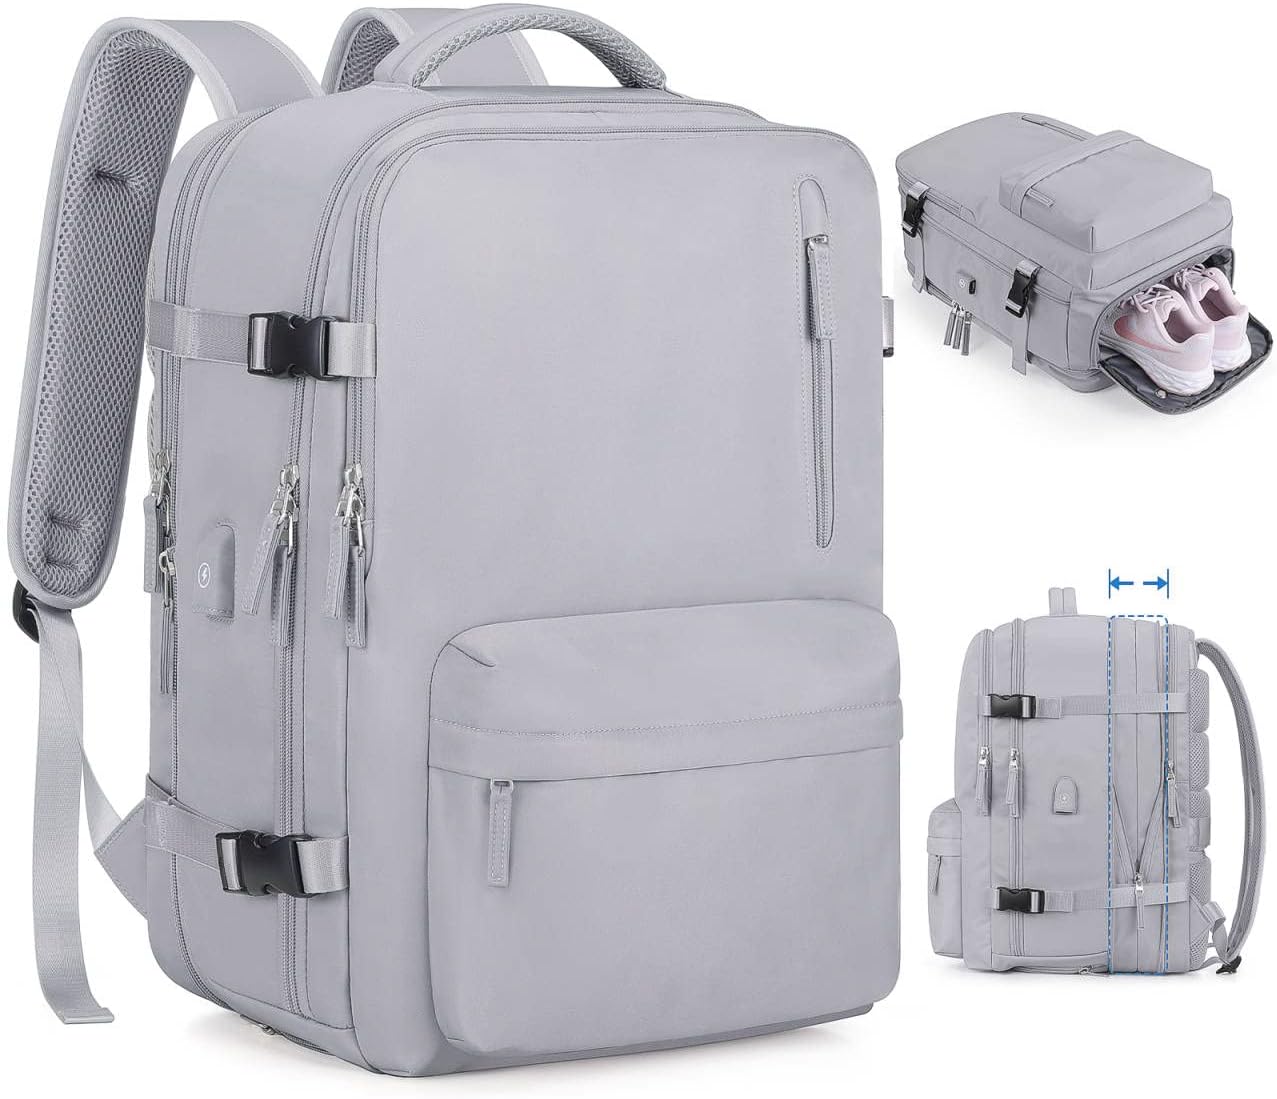 Large Travel Laptop Backpack, Expandable 45L Carry On [...]